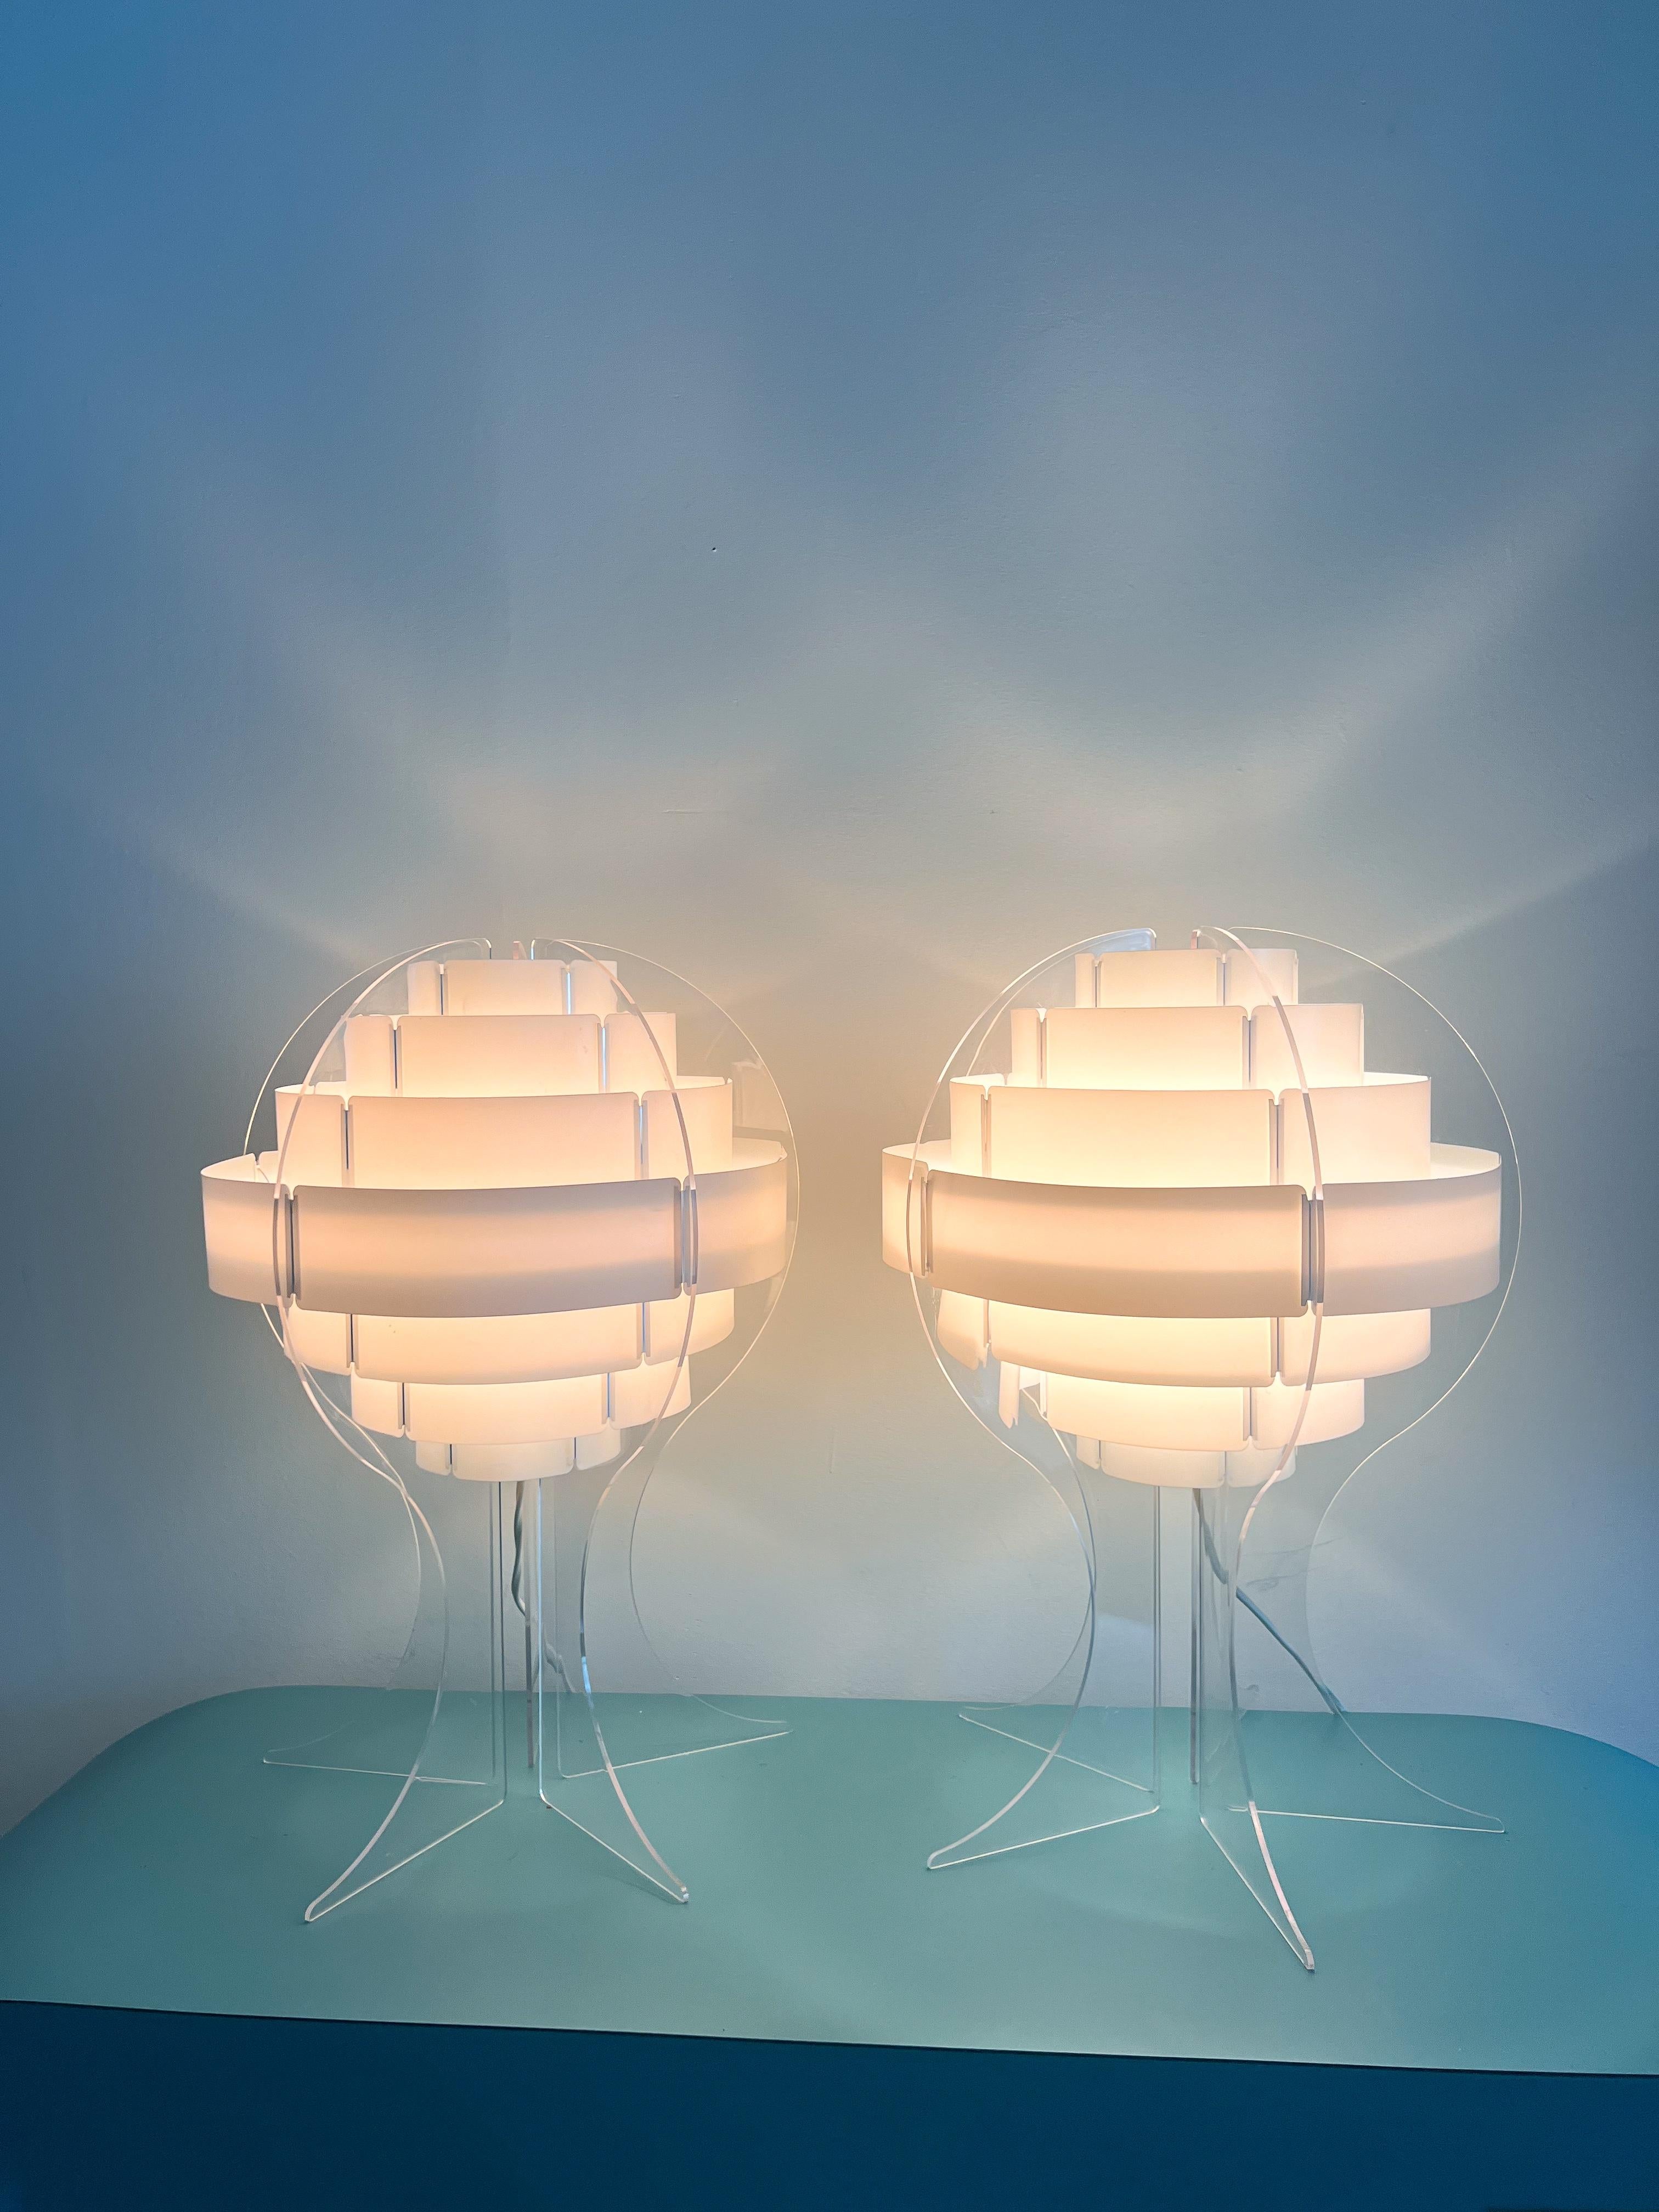 The 'Strips' table lamp, crafted in the late 1960s to early 1970s by Preben Jacobsen & Flemming Brylle in Denmark, showcases a stylish and unique design. Featuring a transparent acrylic base that cradles a shade composed of interconnected white